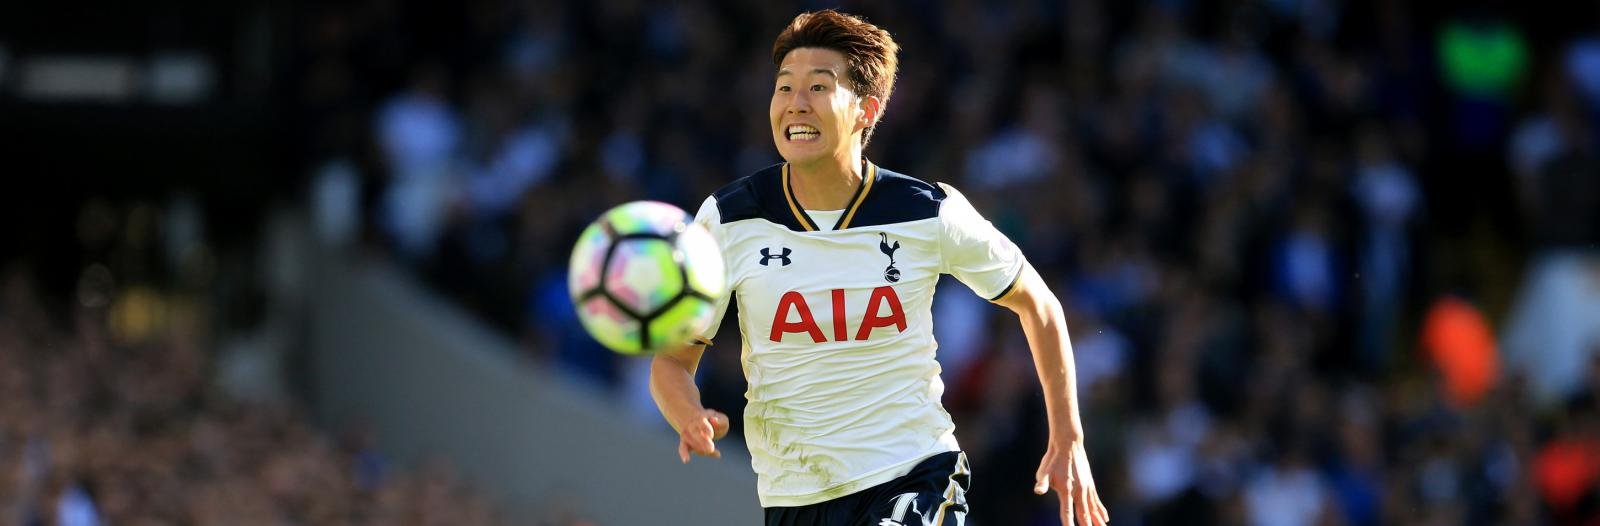 10 things you [probably] didn’t know about Tottenham’s Son Heung-min